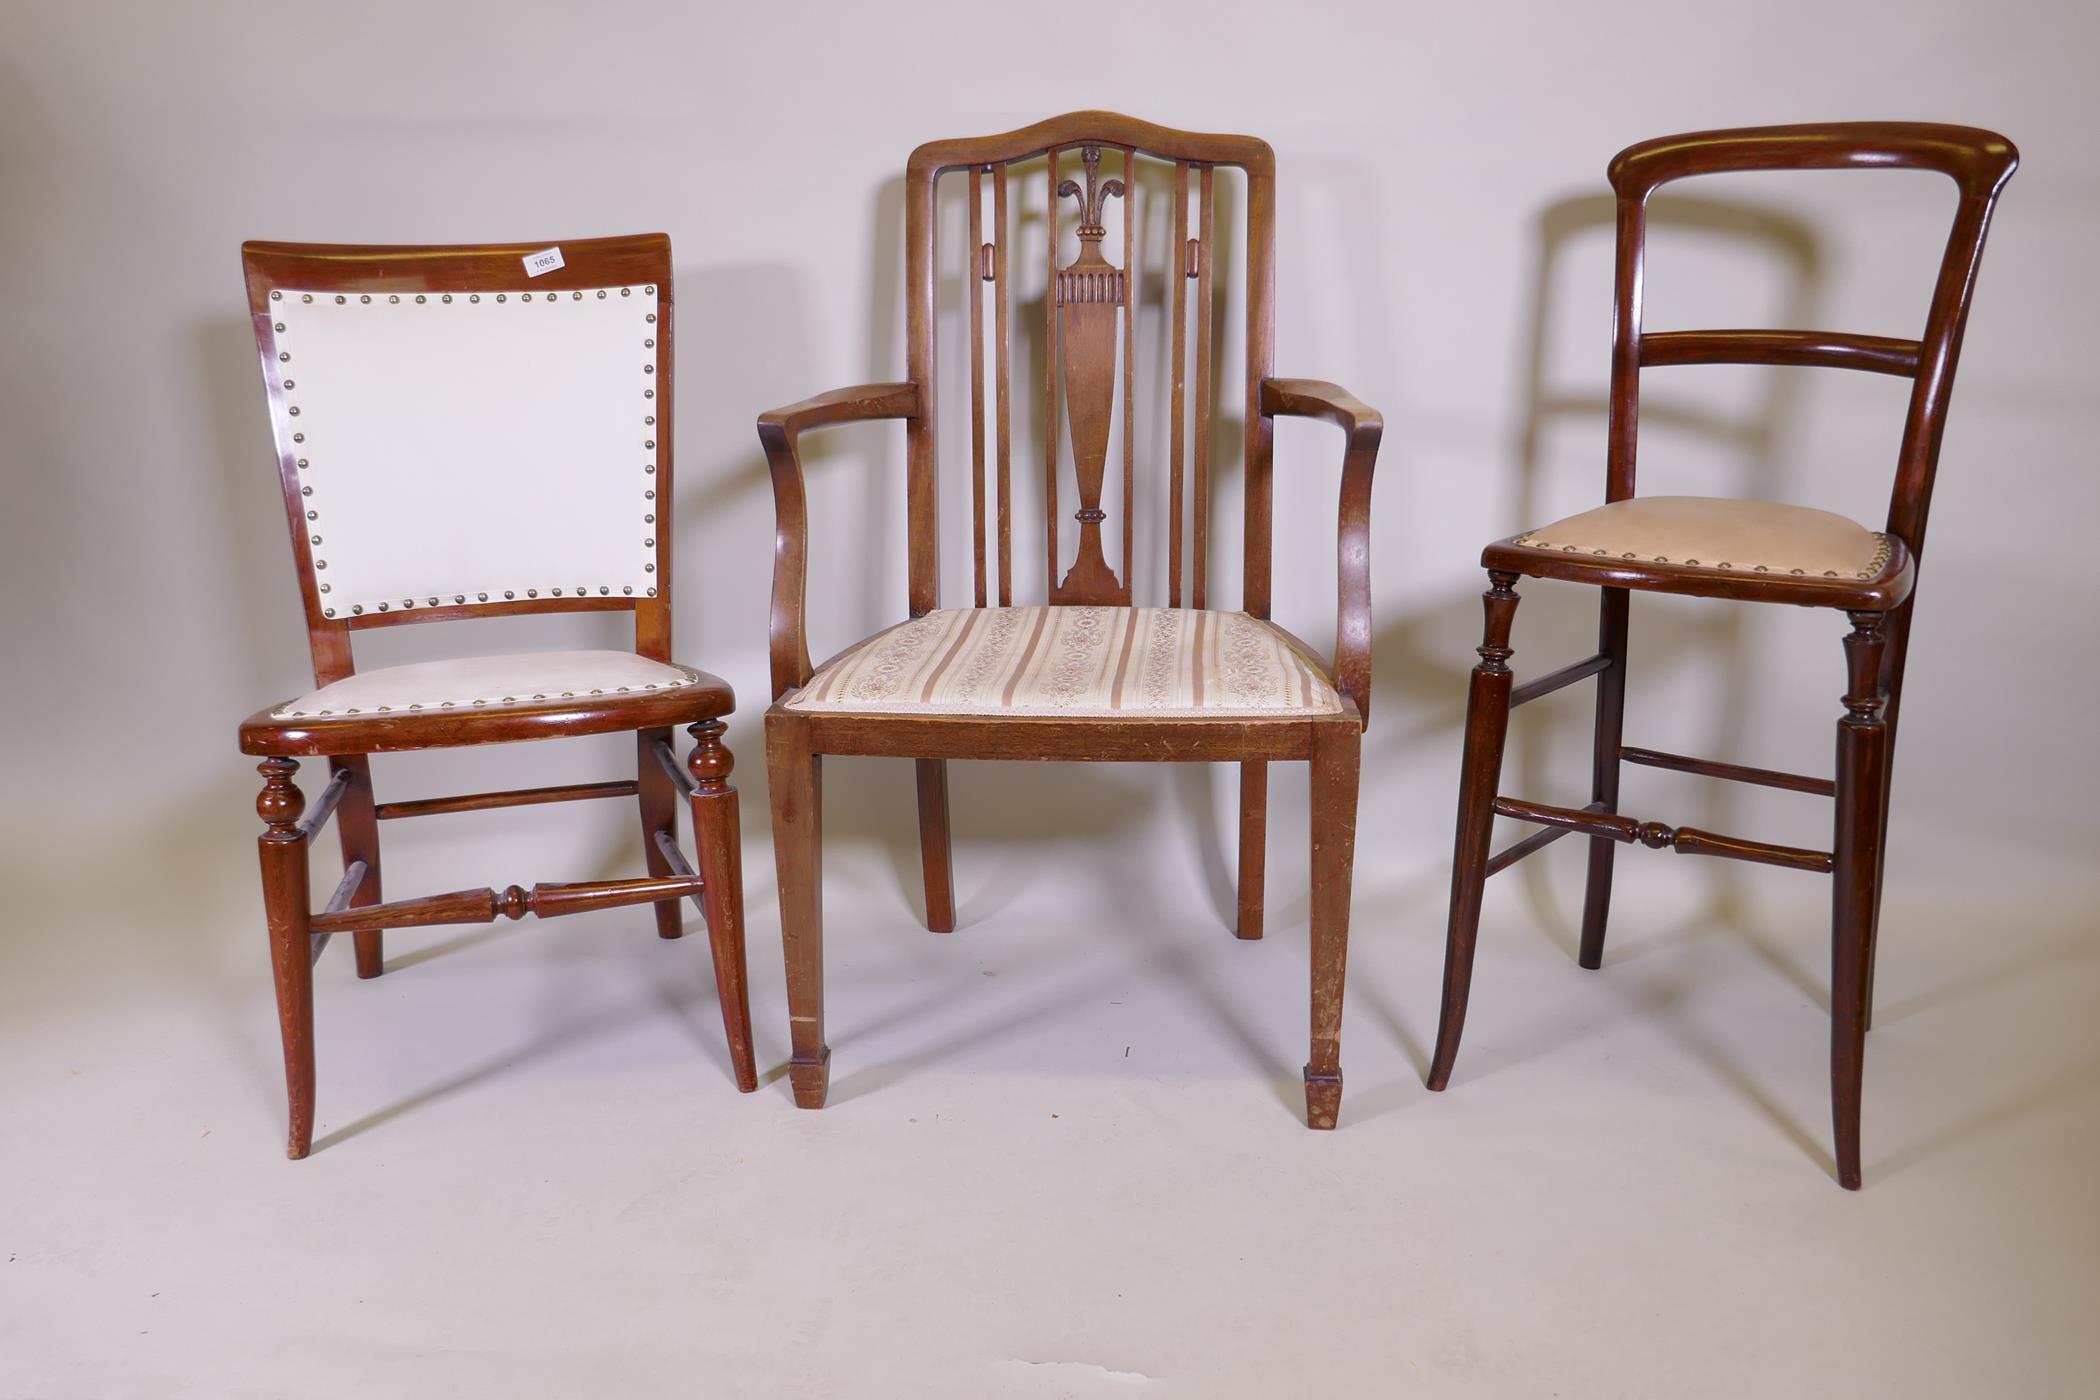 A Victorian mahogany correction chair with studded leatherette seat, a nursing chair and an